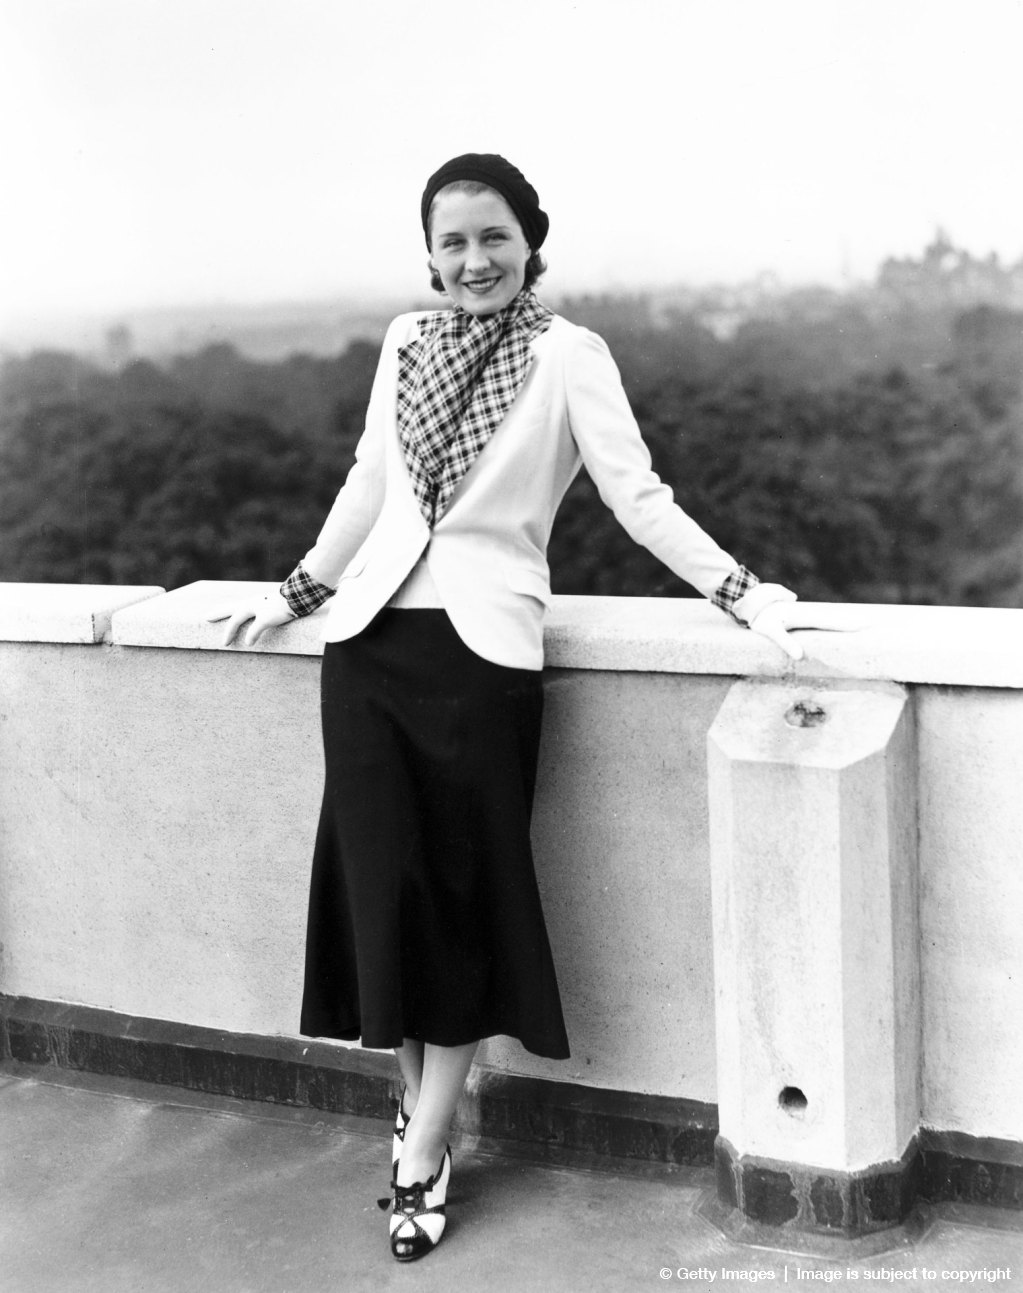 How tall is Norma Shearer?